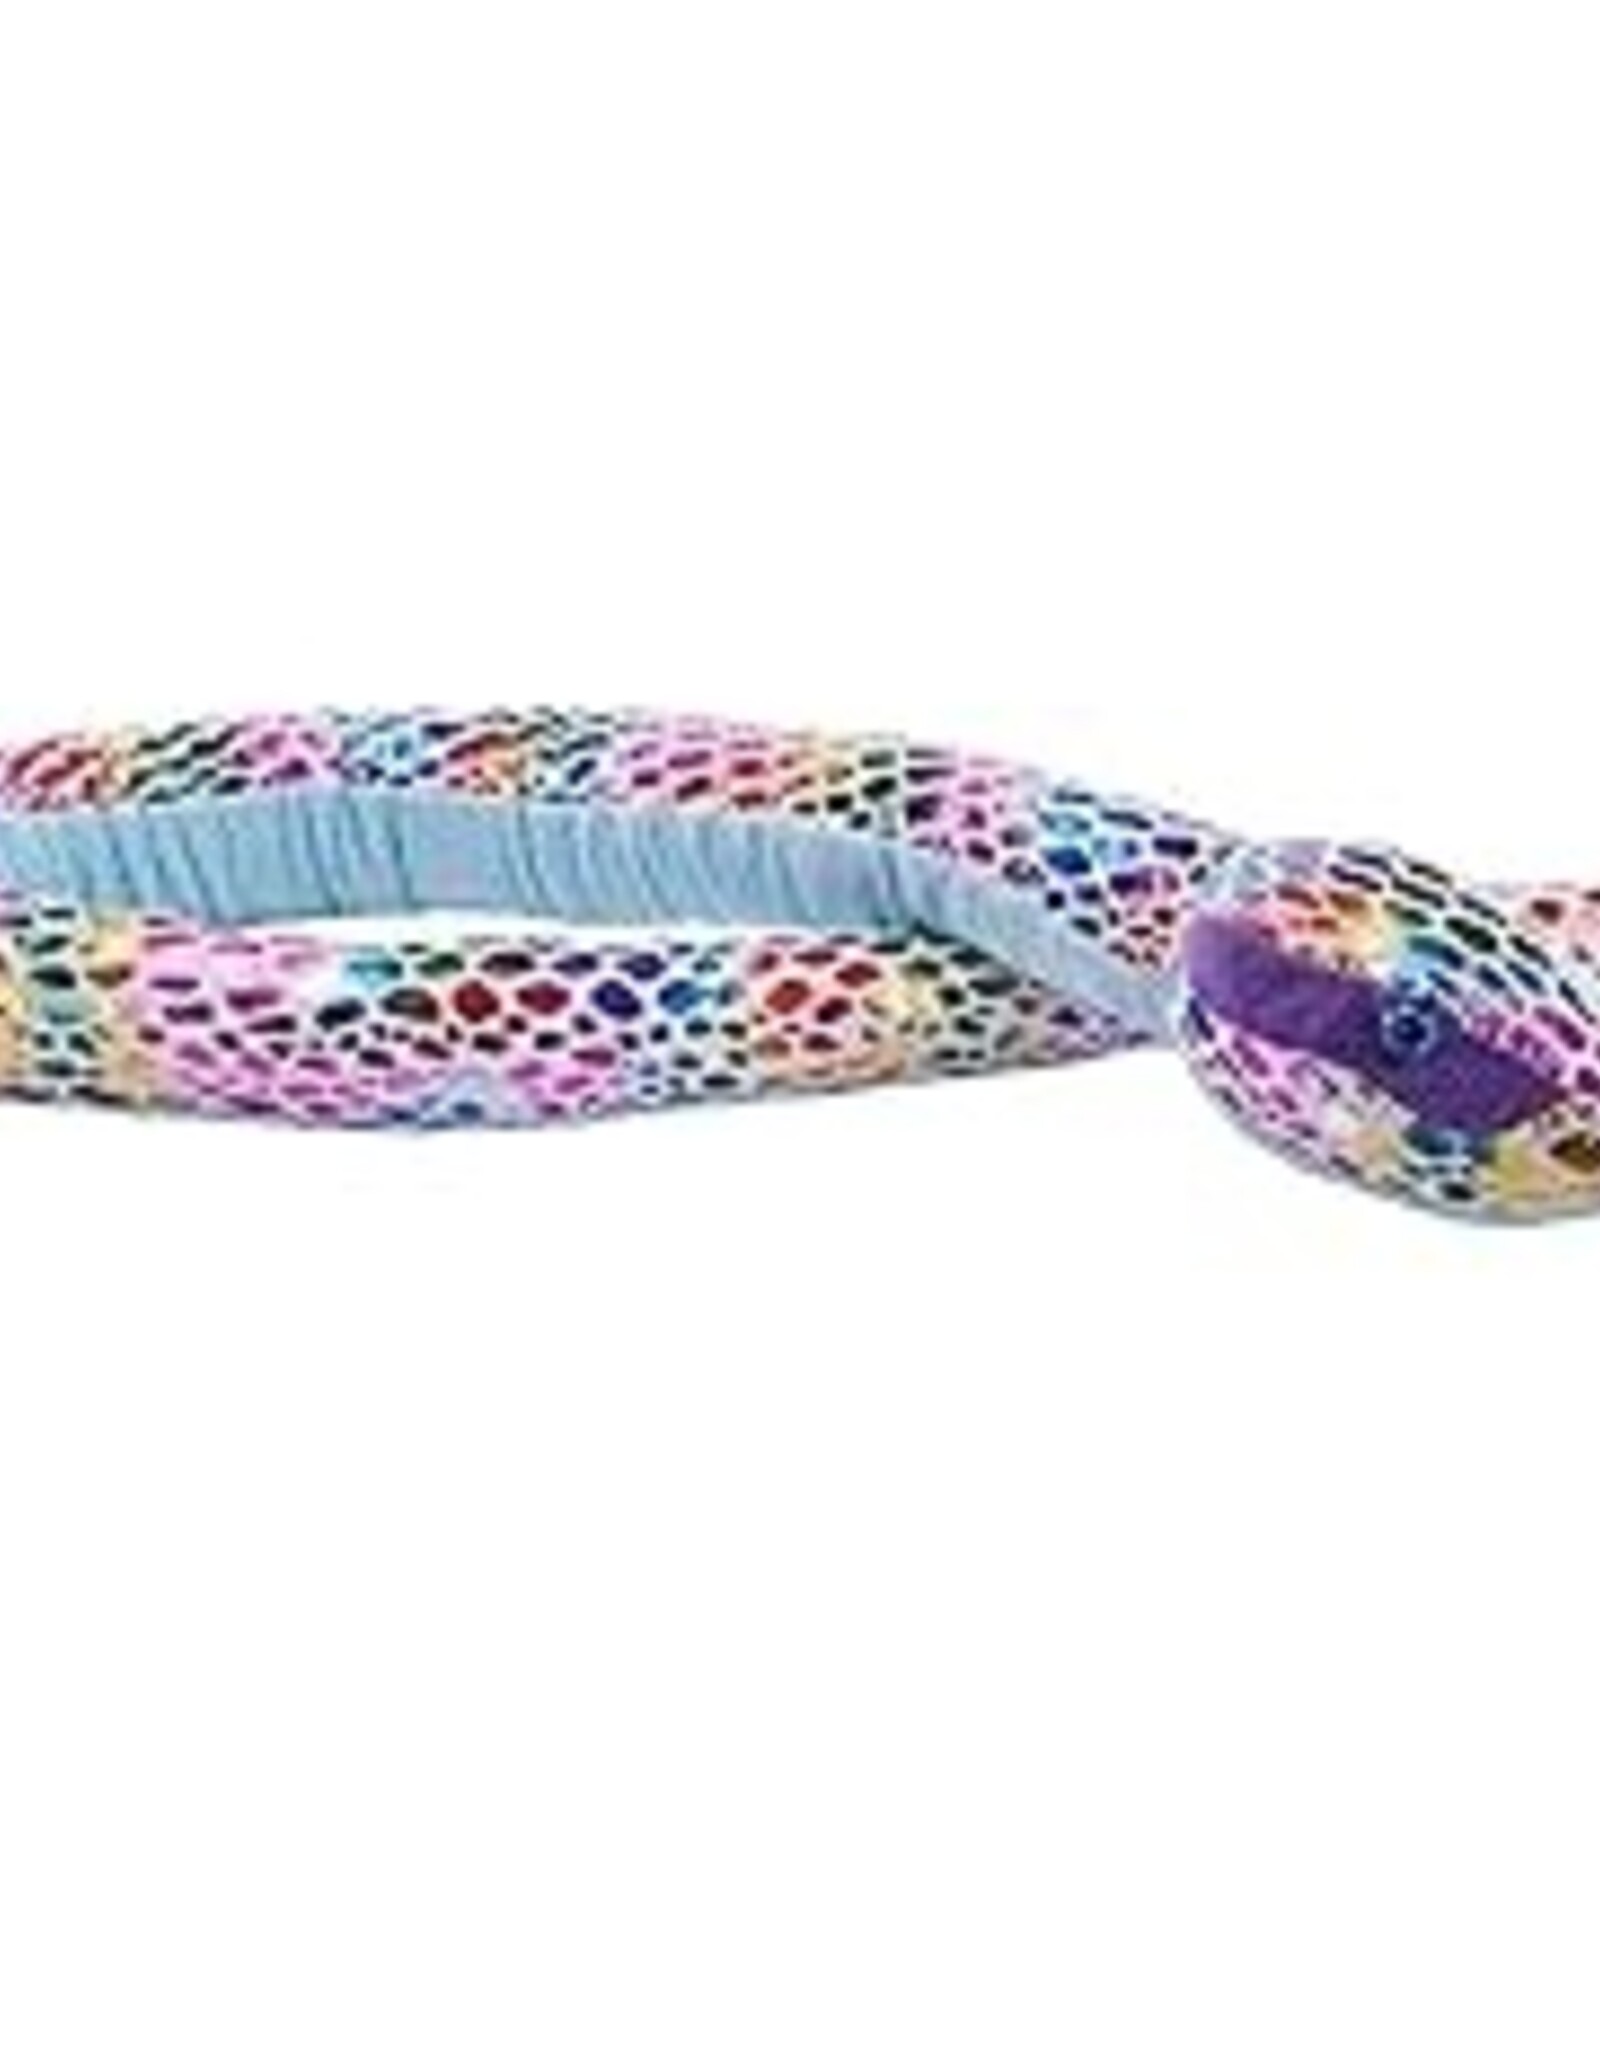 FOILKINS-SNAKE DOTTED RAINBOW